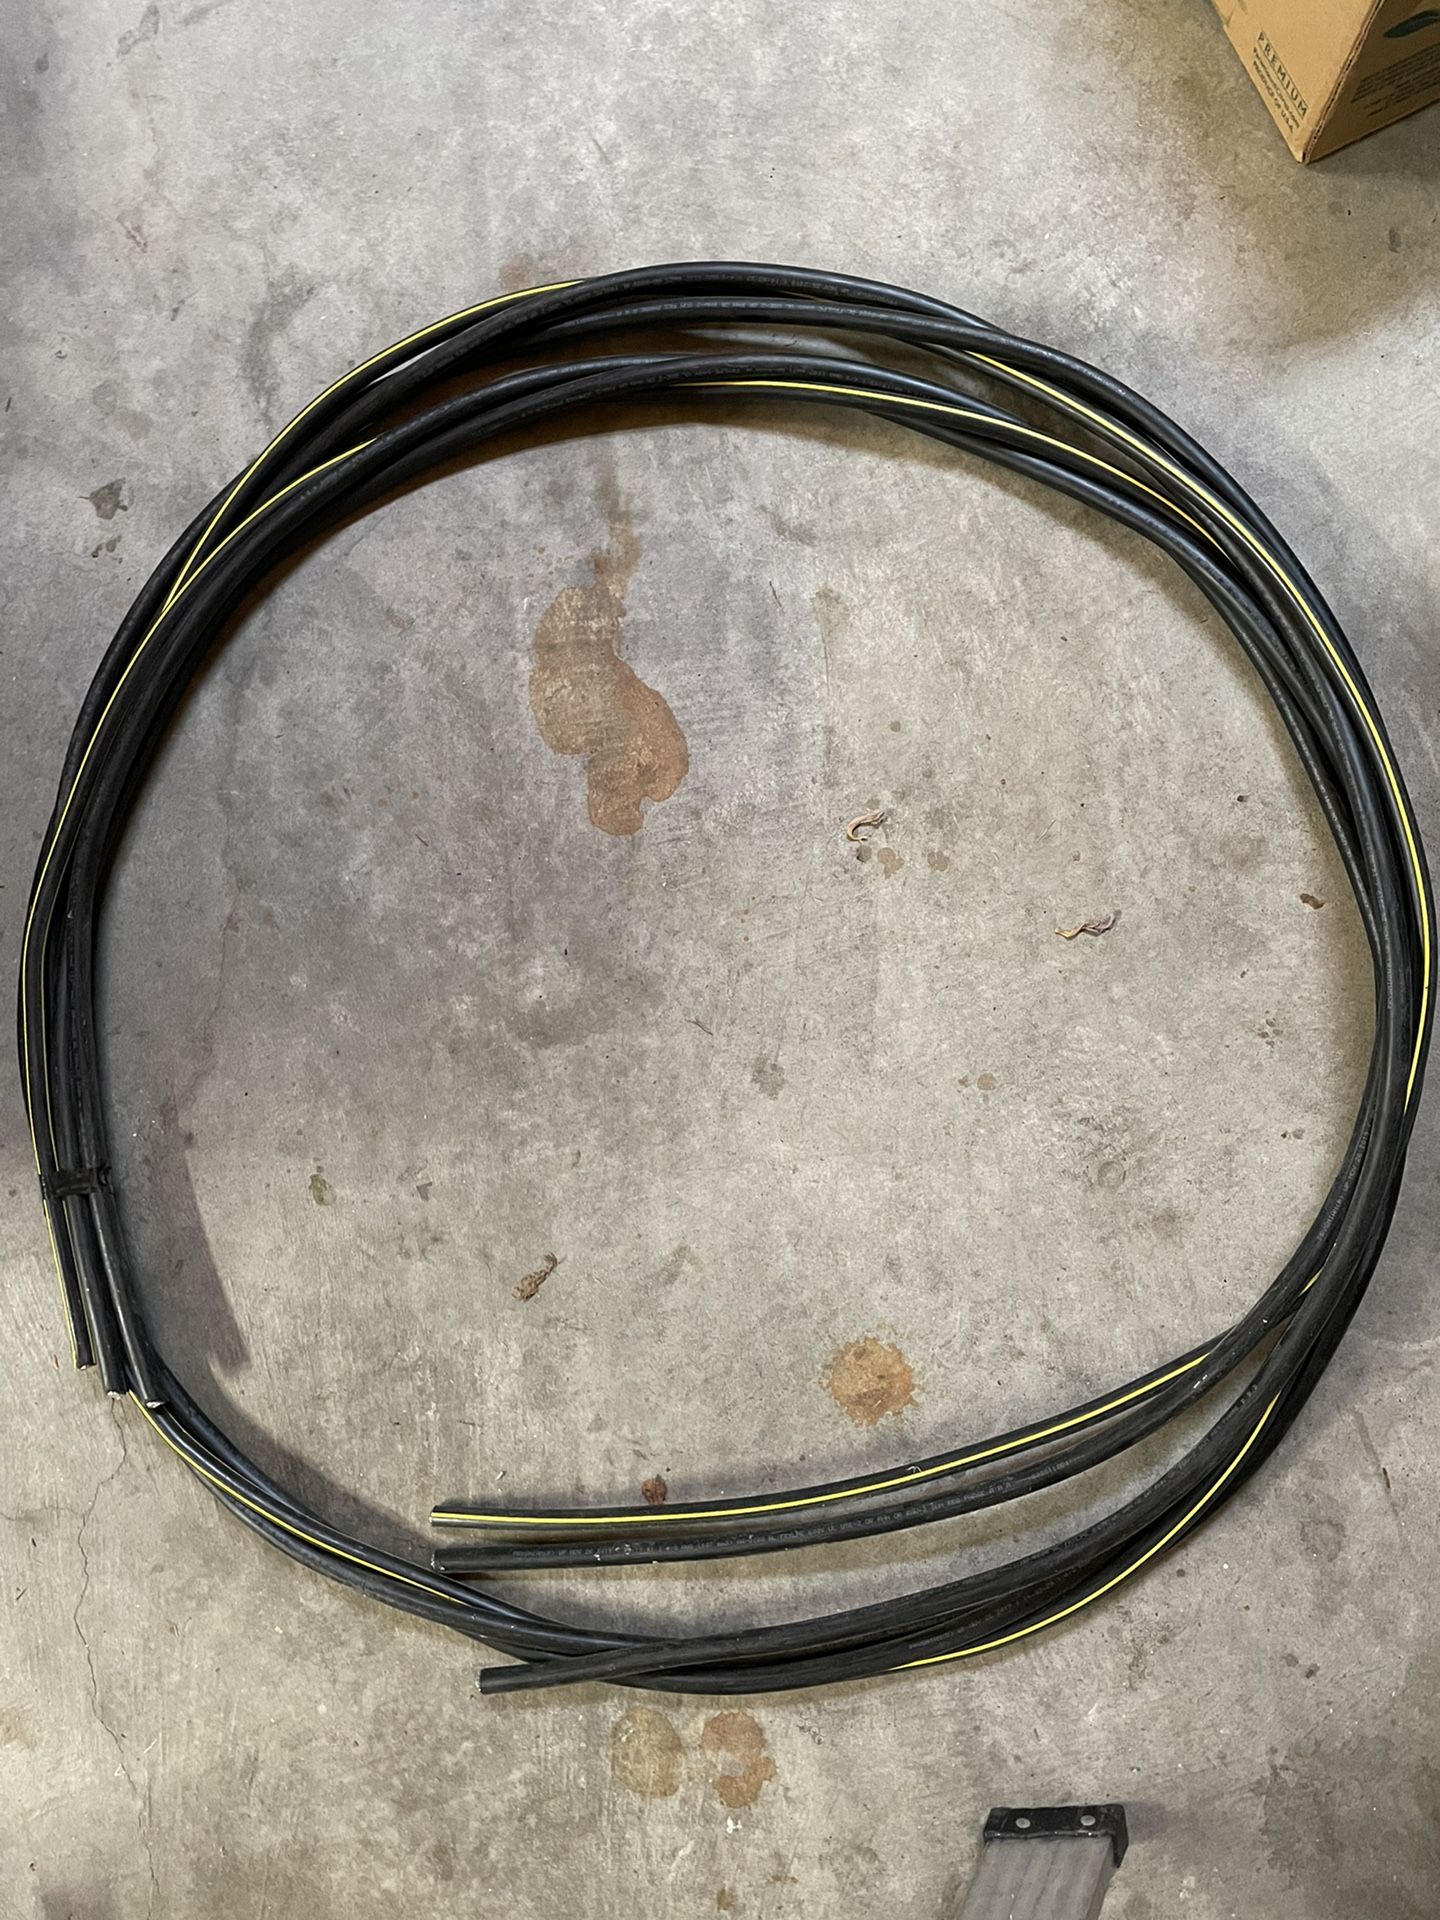 4/0 Feeder Wire 18’x3 Wires-54’ Total 